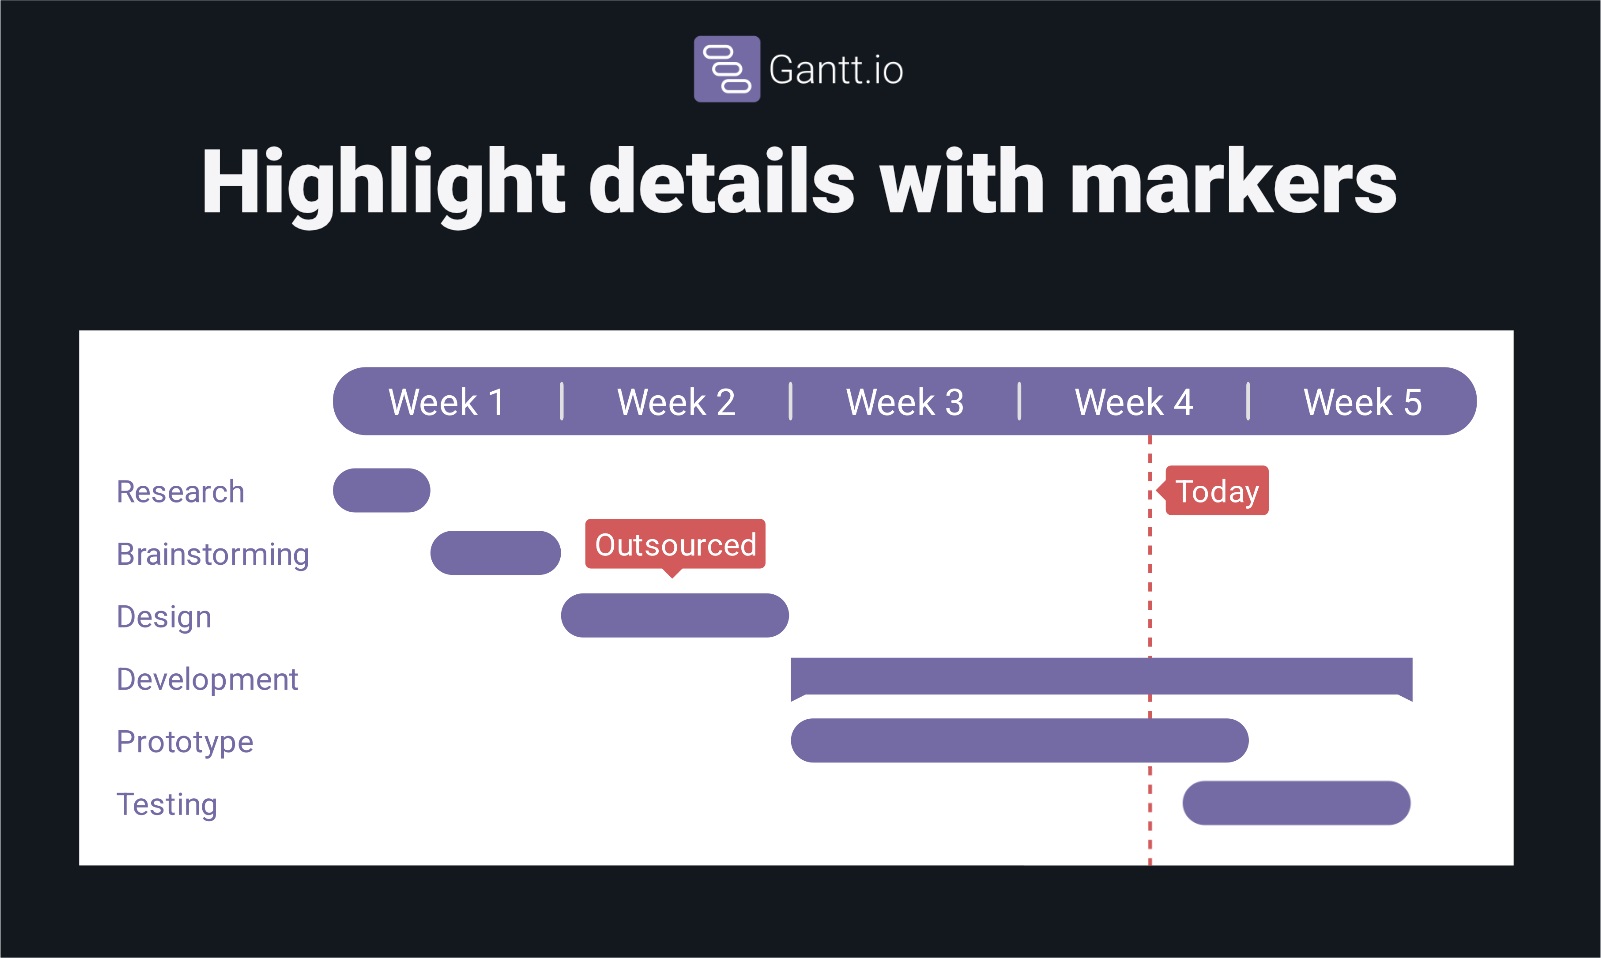 Know more about Gantt.io